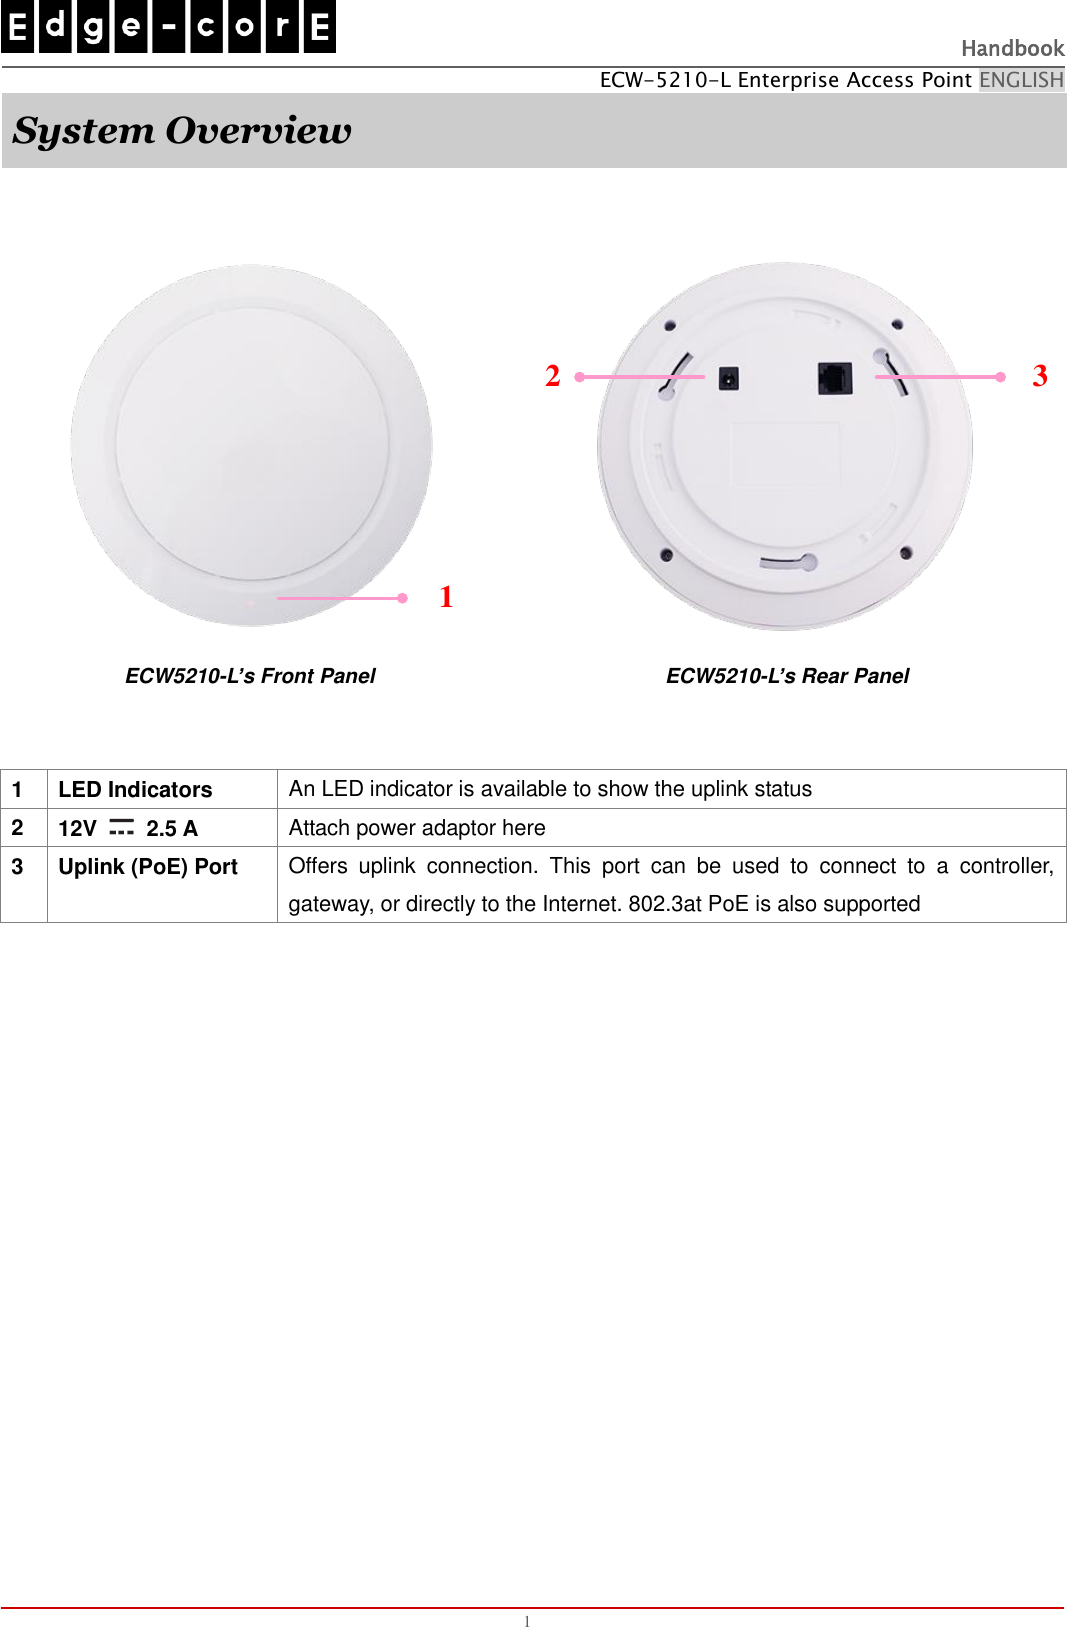   Handbook ECW-5210-L Enterprise Access Point ENGLISH  1 System Overview  12 3      ECW5210-L’s Front Panel              ECW5210-L’s Rear Panel   1 LED Indicators   An LED indicator is available to show the uplink status   2 12V    2.5 A Attach power adaptor here 3 Uplink (PoE) Port   Offers  uplink  connection.  This  port  can  be  used  to  connect  to  a  controller, gateway, or directly to the Internet. 802.3at PoE is also supported       